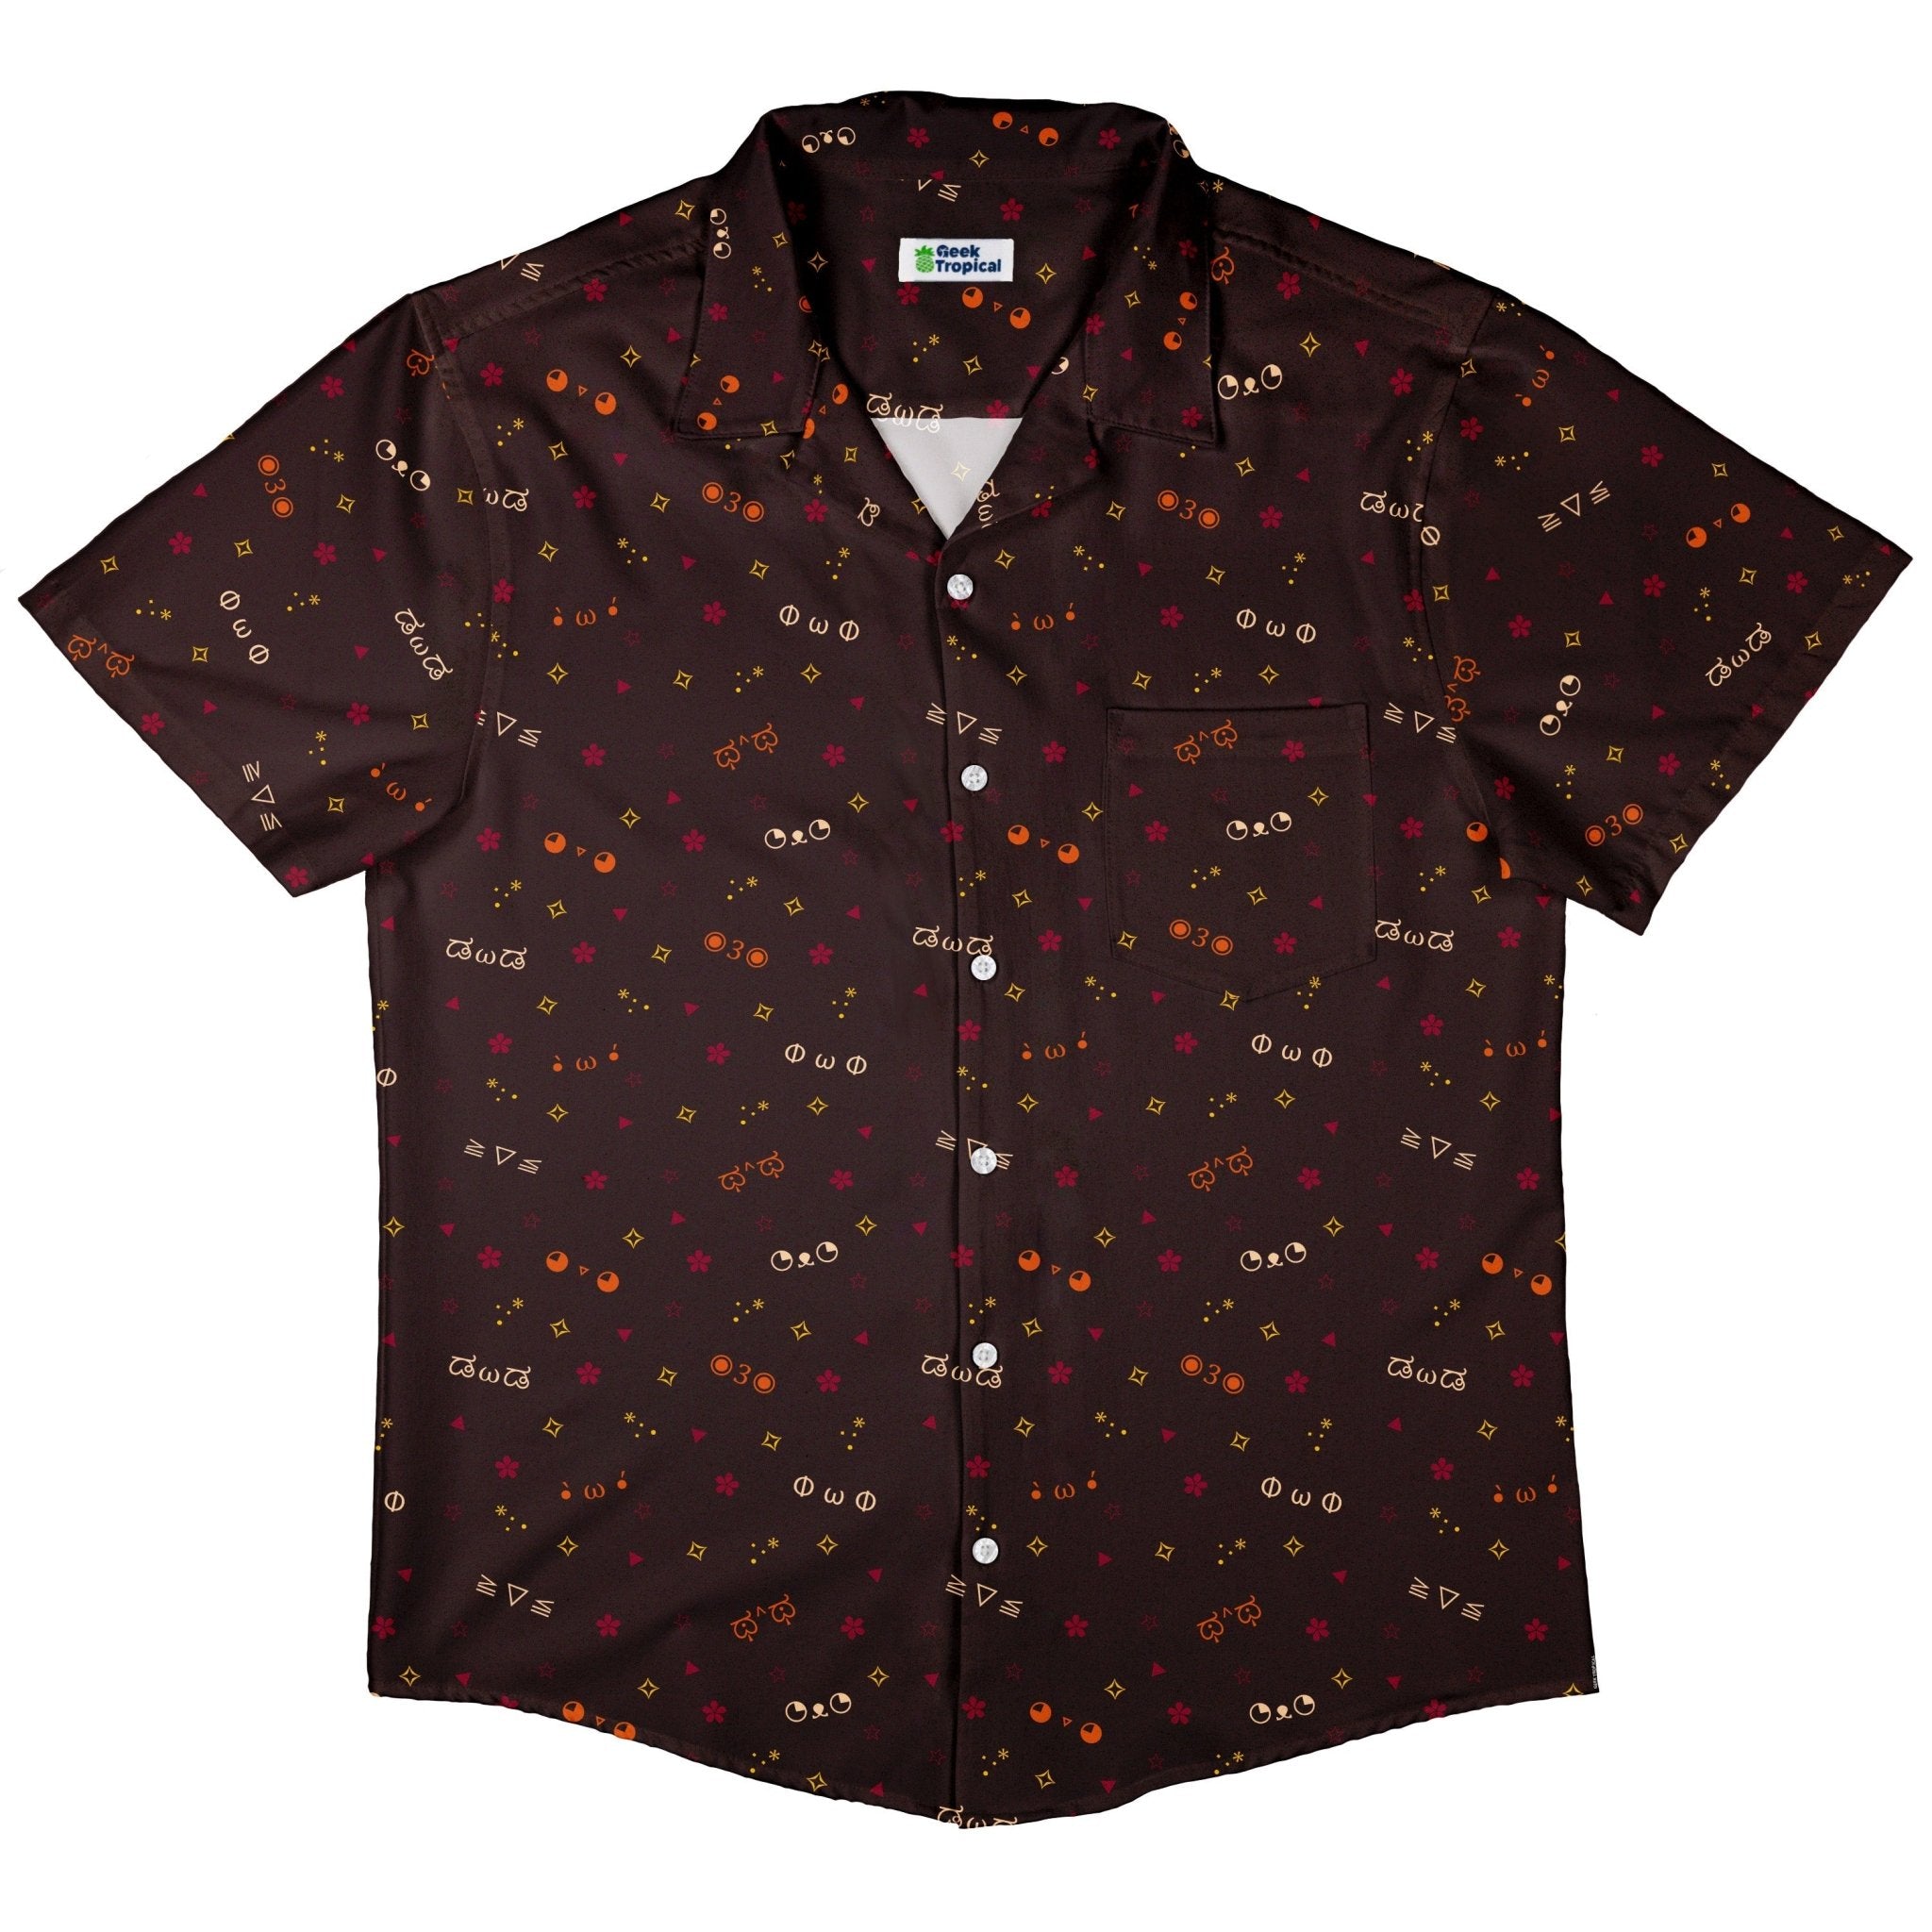 Kao Emojis Red Button Up Shirt - adult sizing - Anime - Design by Ardi Tong